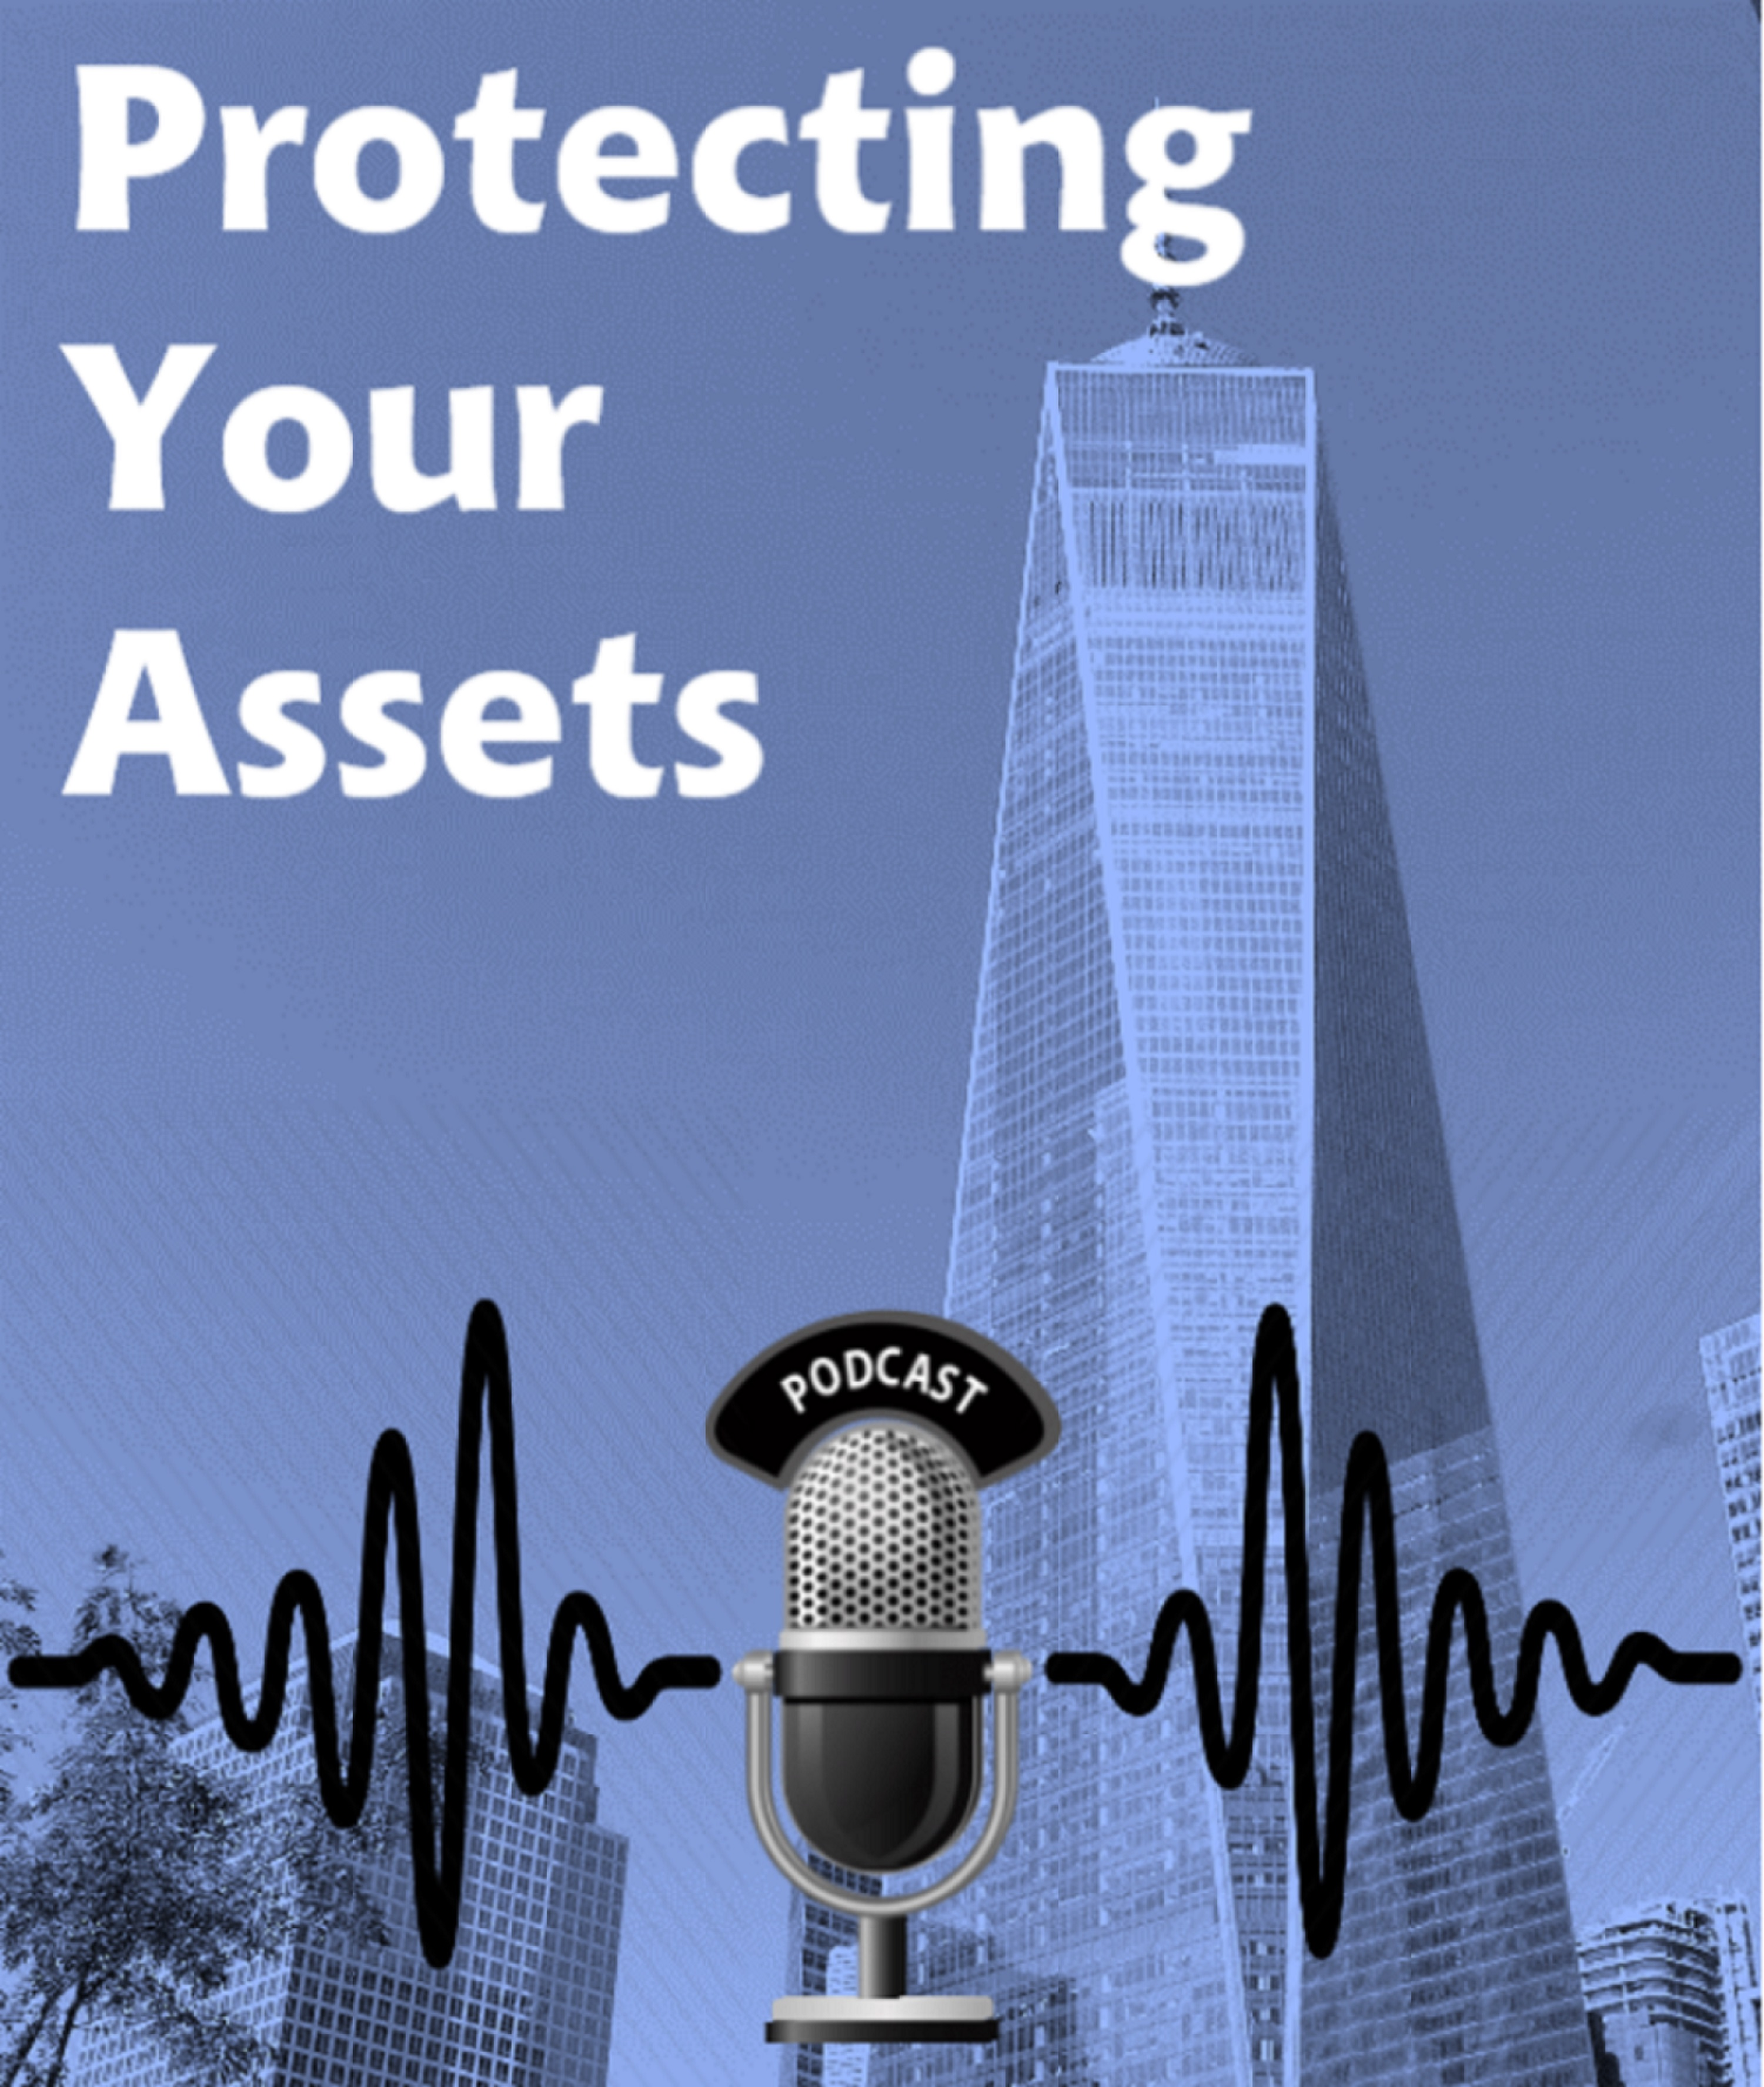 Protecting Your Assets